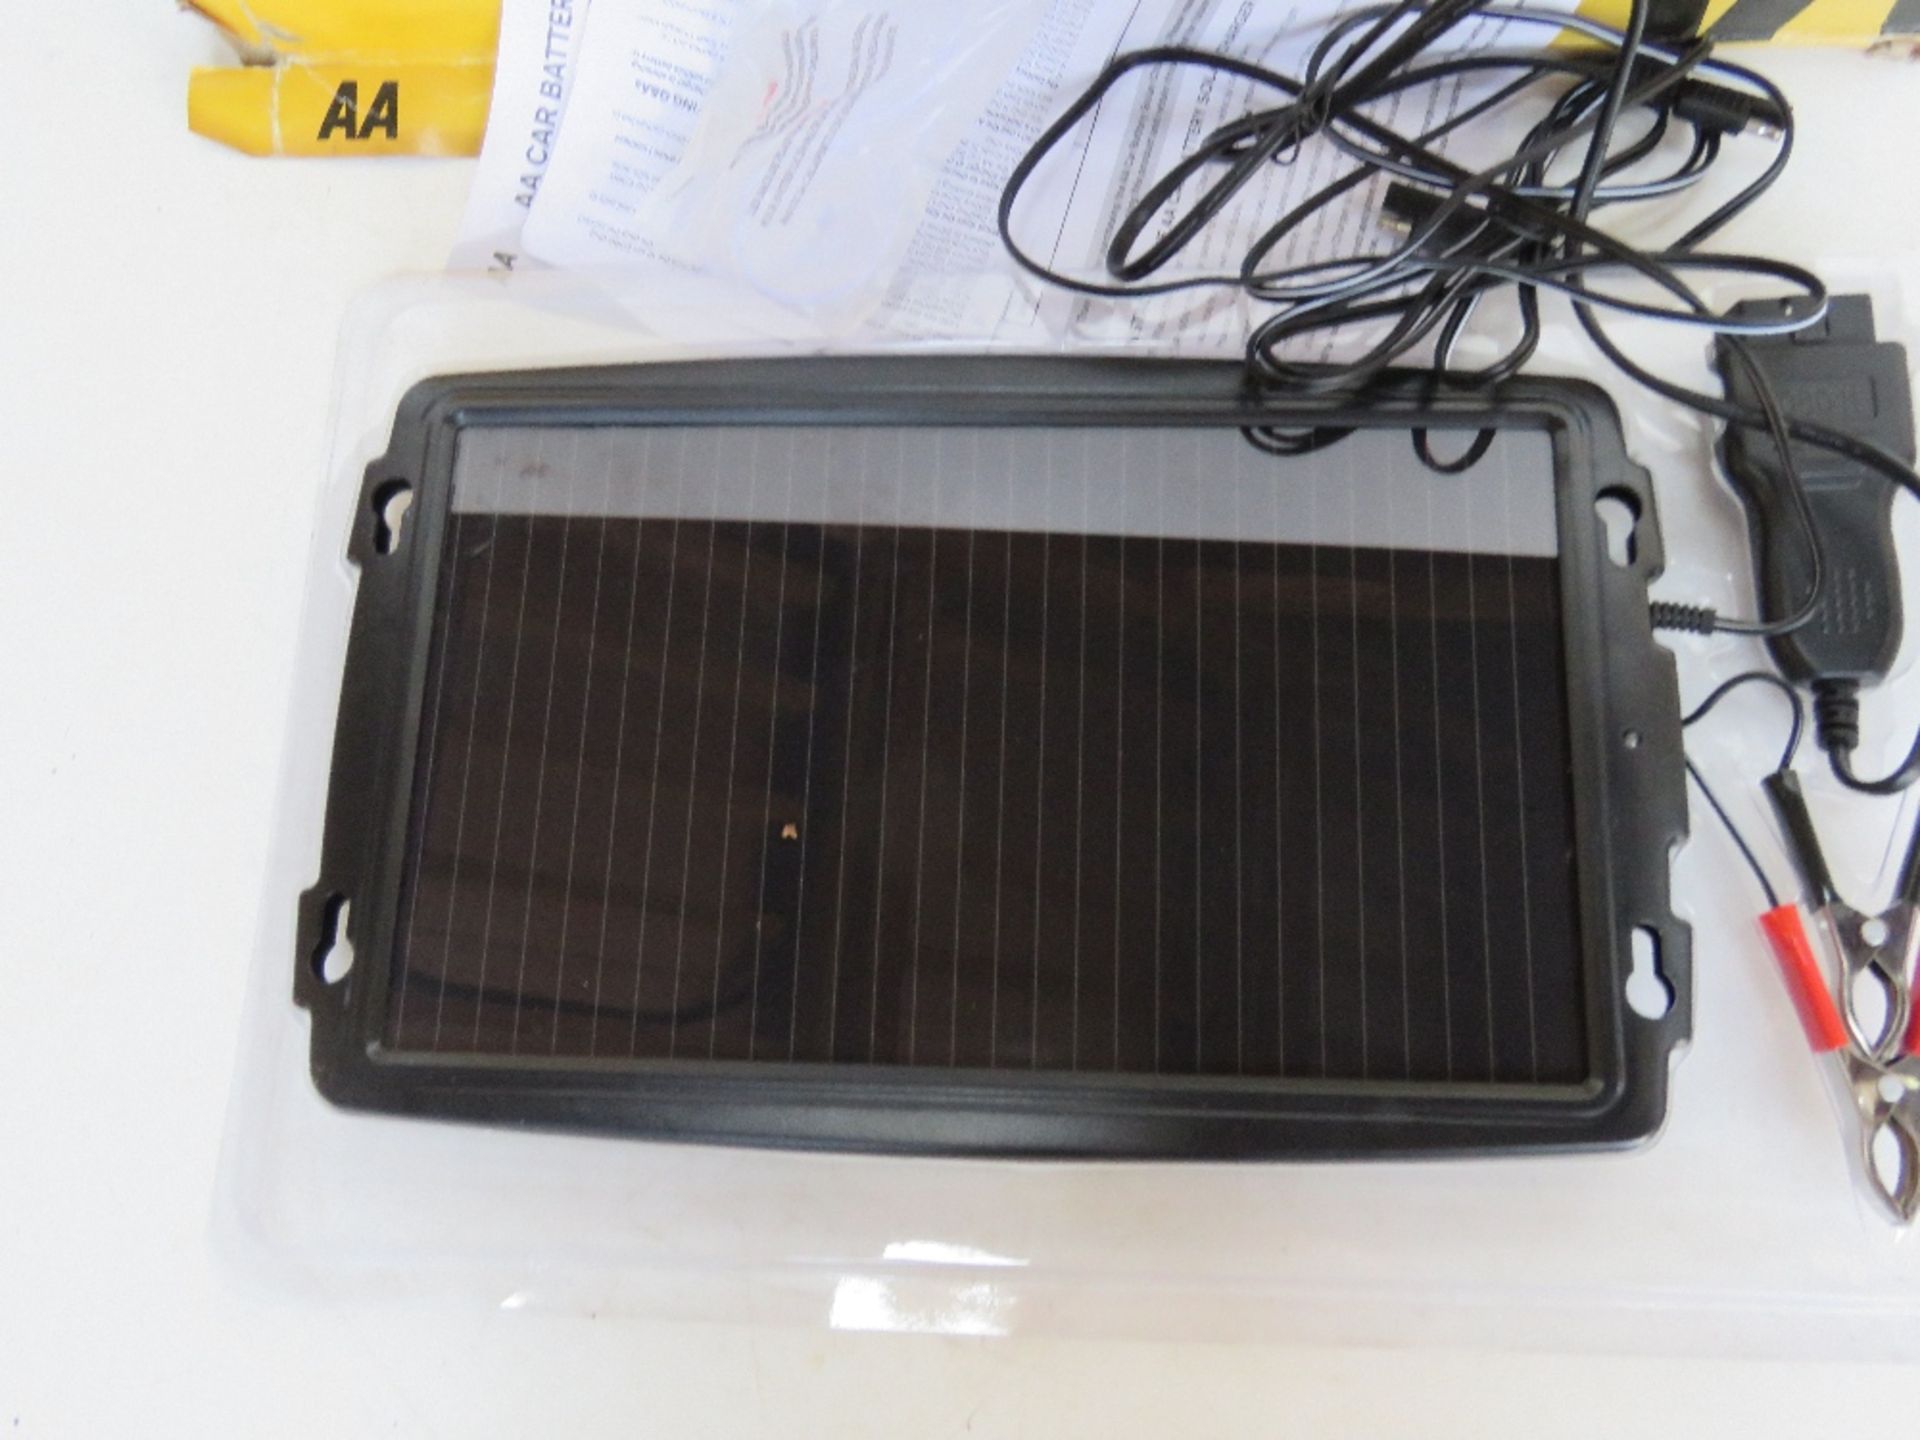 An AA car battery solar charger. In box, box a/f. - Image 2 of 3